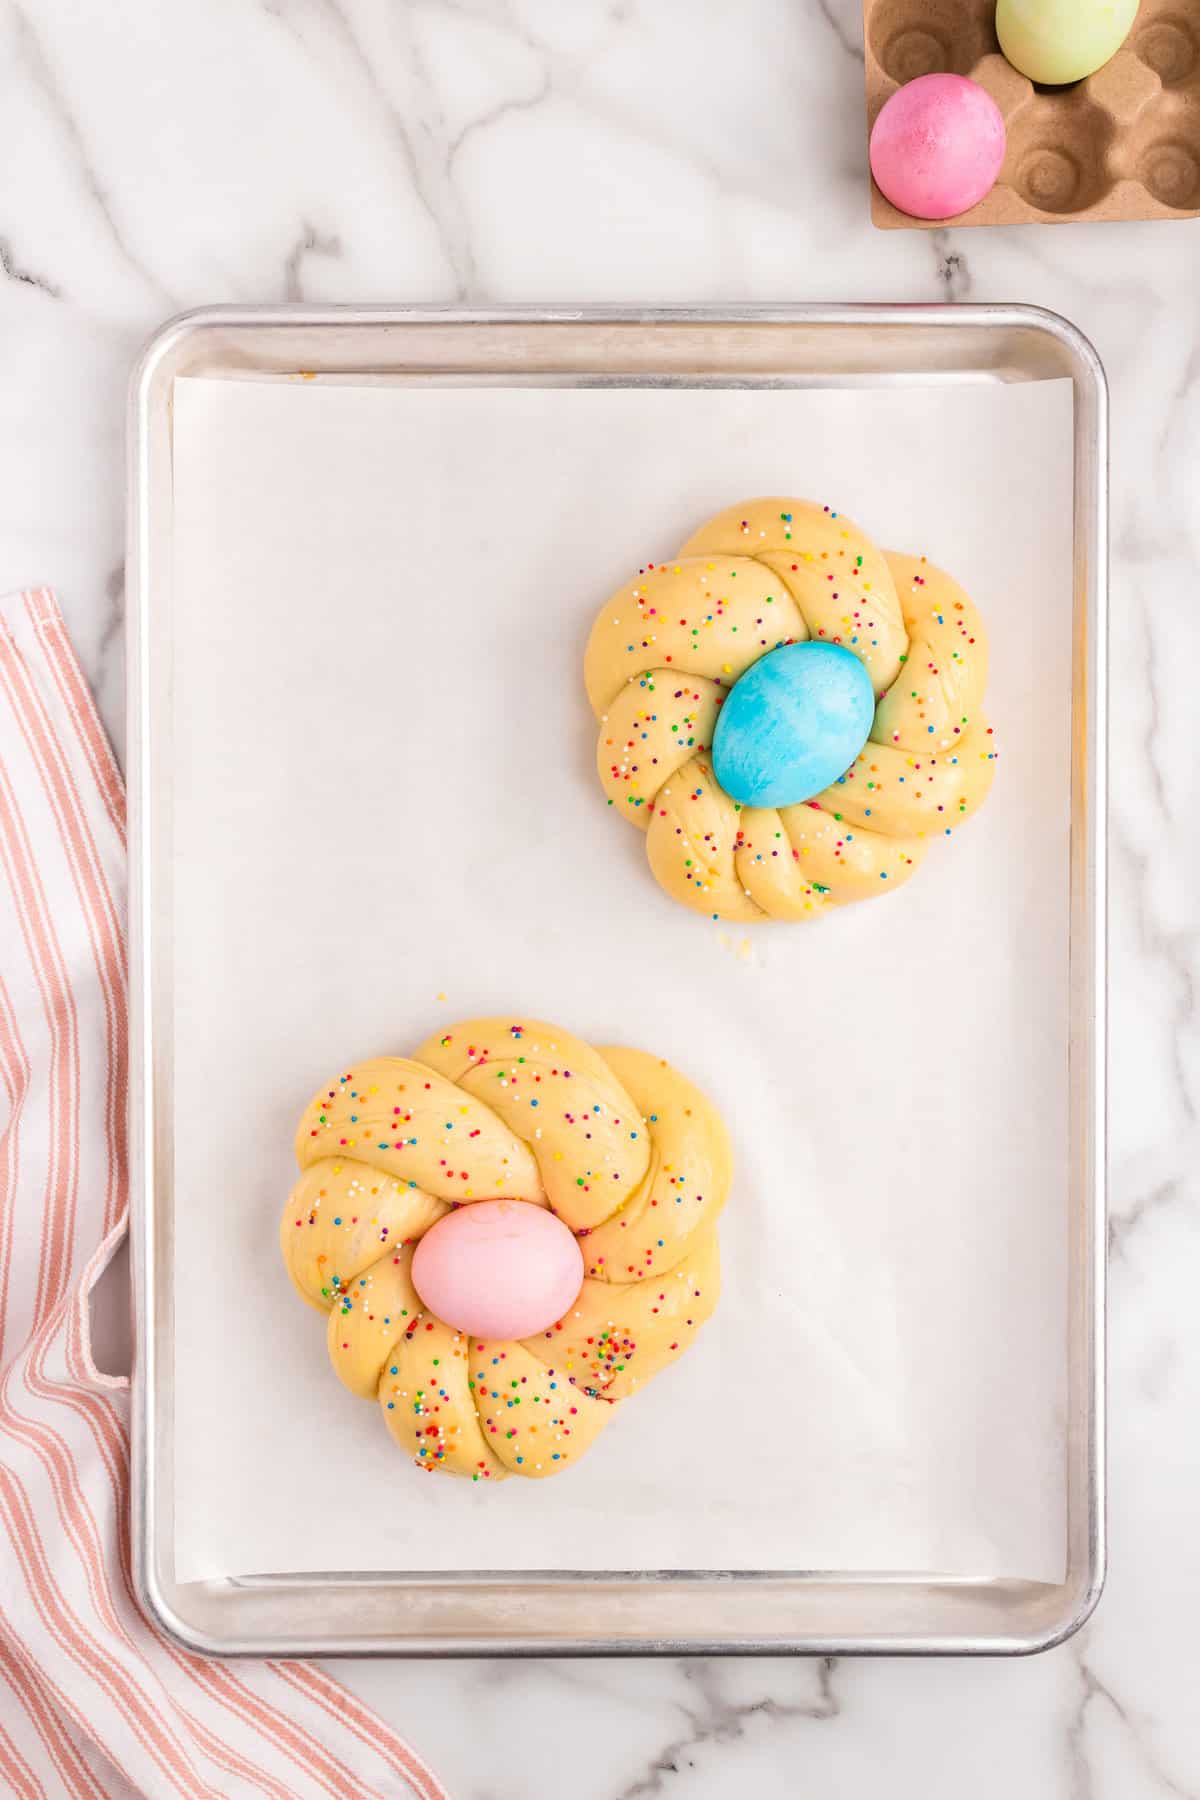 Placing dyed Easter Egg in Easter Bread and adding sprinkles on parchment-lined baking sheet